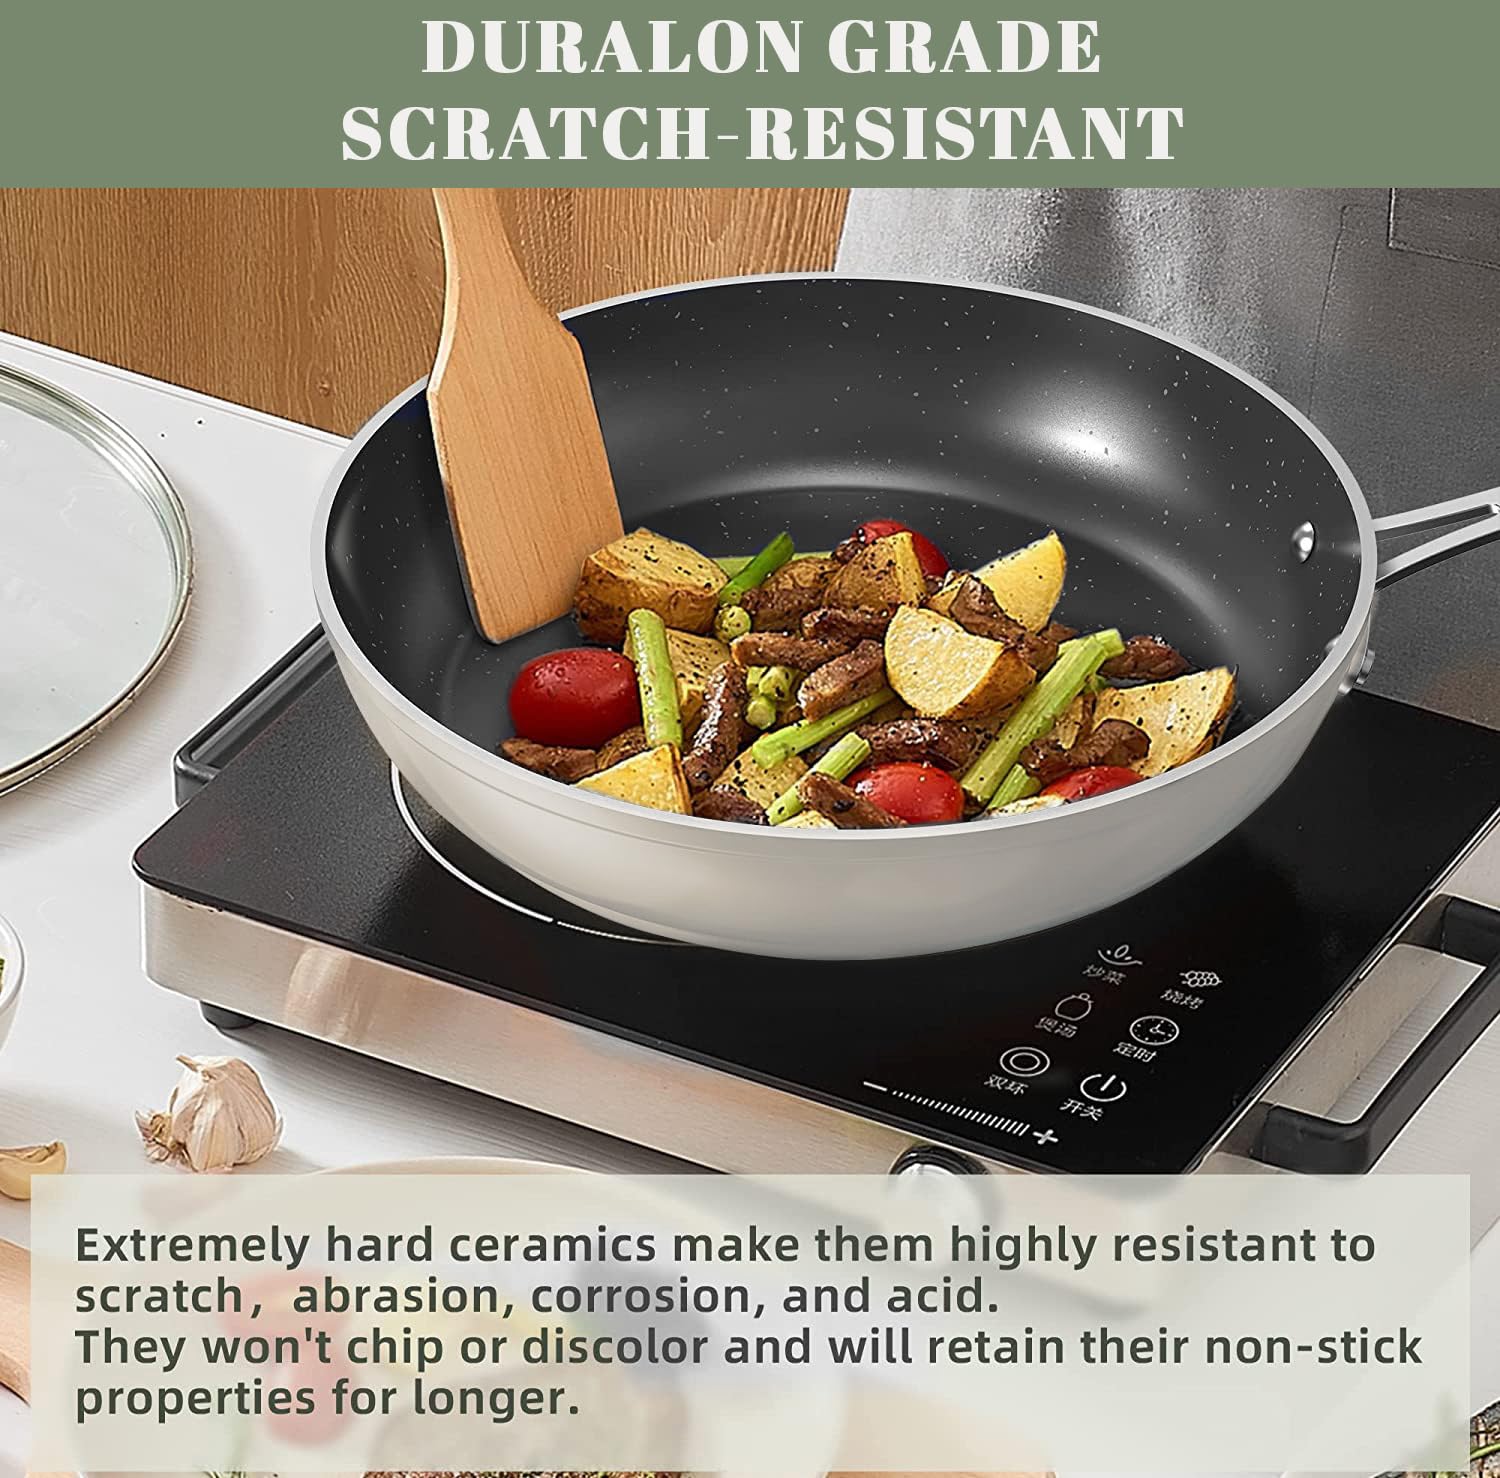 Nuwave 9pc Cookware Set Healthy Duralon Blue Ceramic Nonstick Coated, Diamond Infused Scratch-Resistant, PTFE & PFOA Free, Oven Safe, Induction Ready & Evenly Heats, Tempered Glass Lids & Stay-Cool Ha